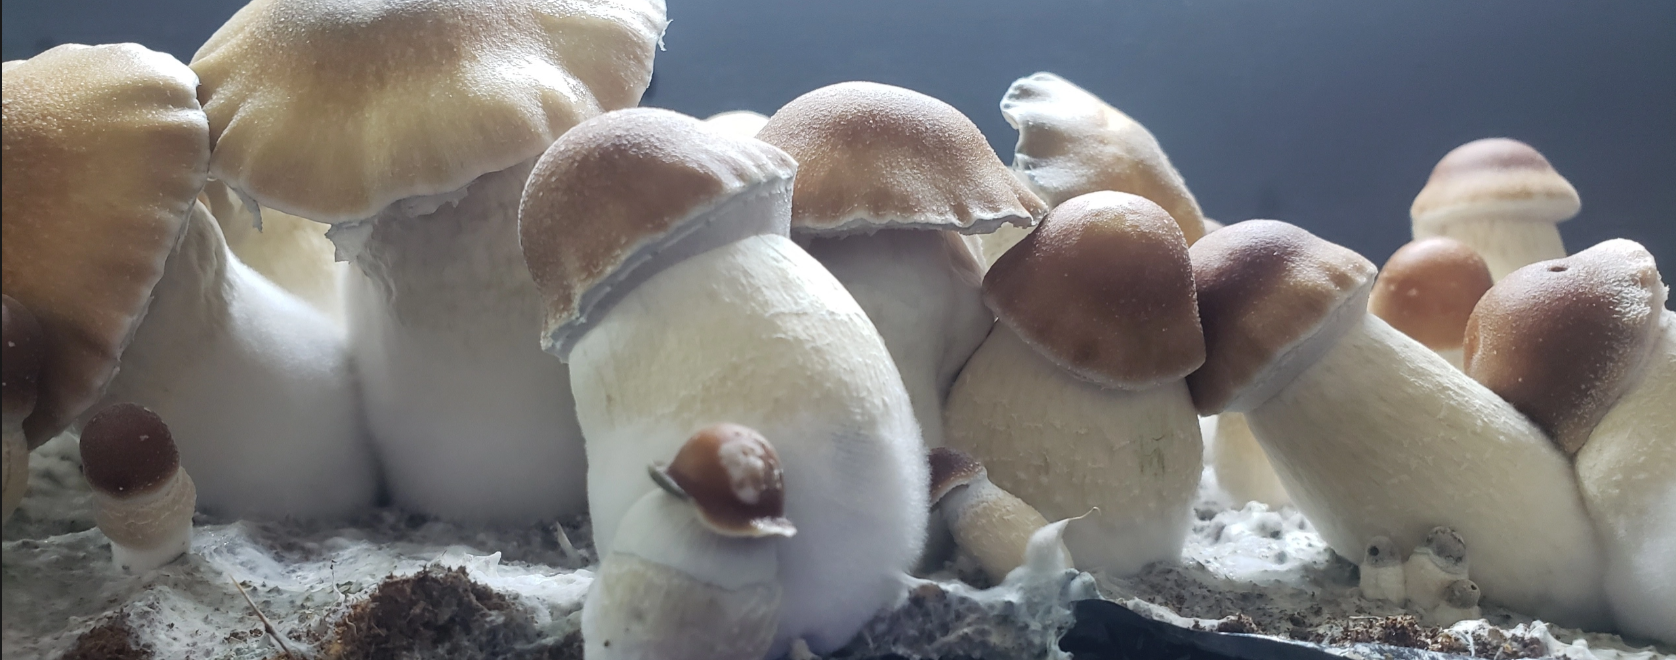 Why are Penis Envy Shrooms so Popular?